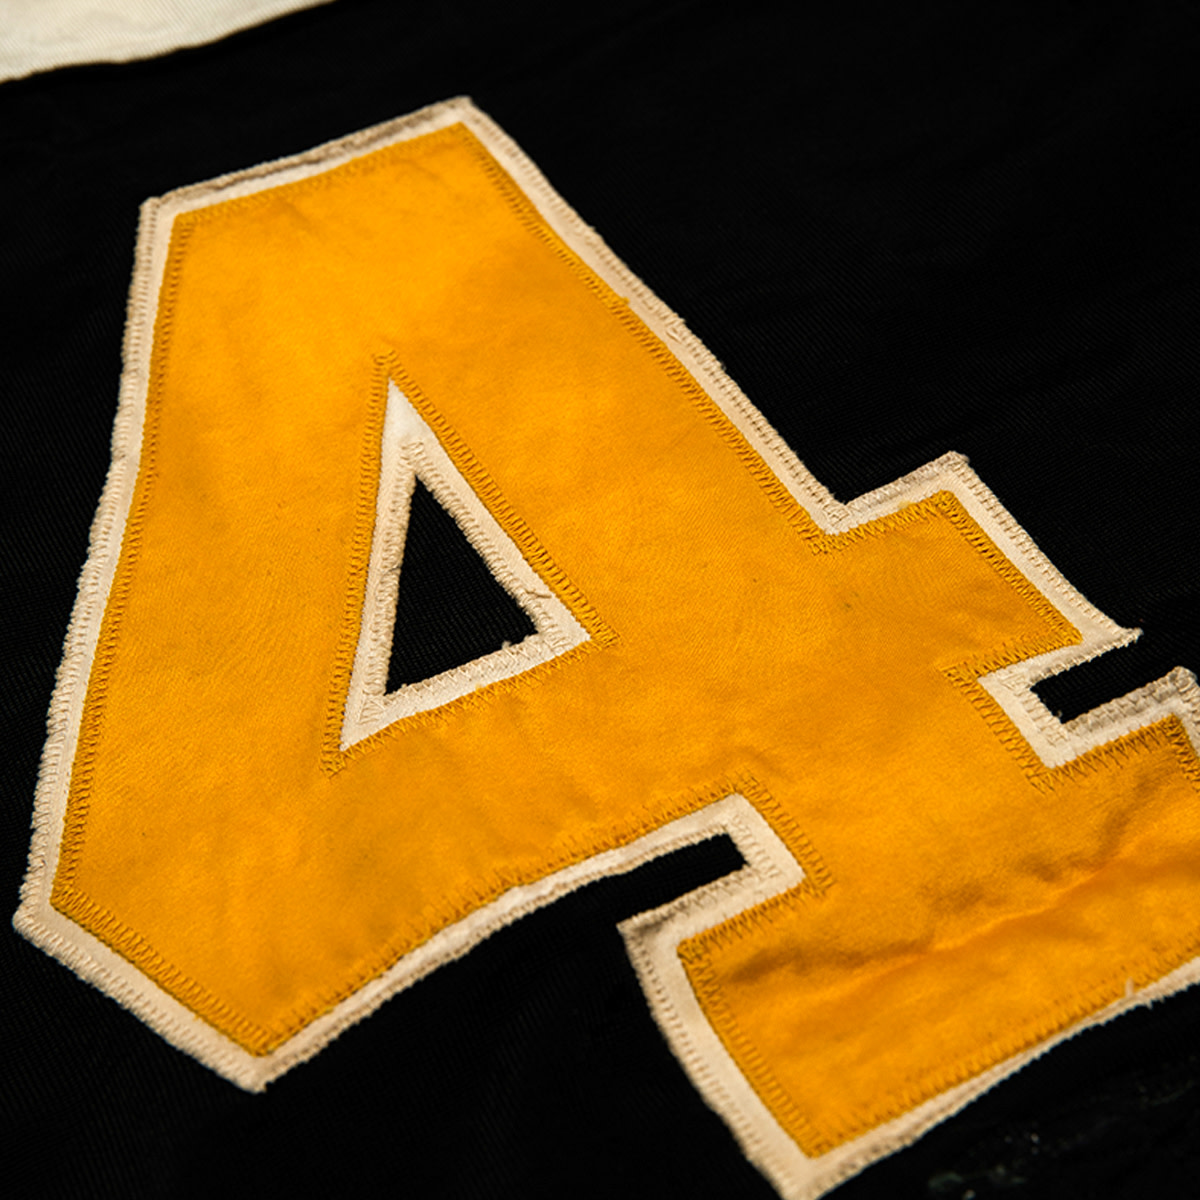 Stains on the front of Bobby Orr's game-worn jersey from 1970-71.